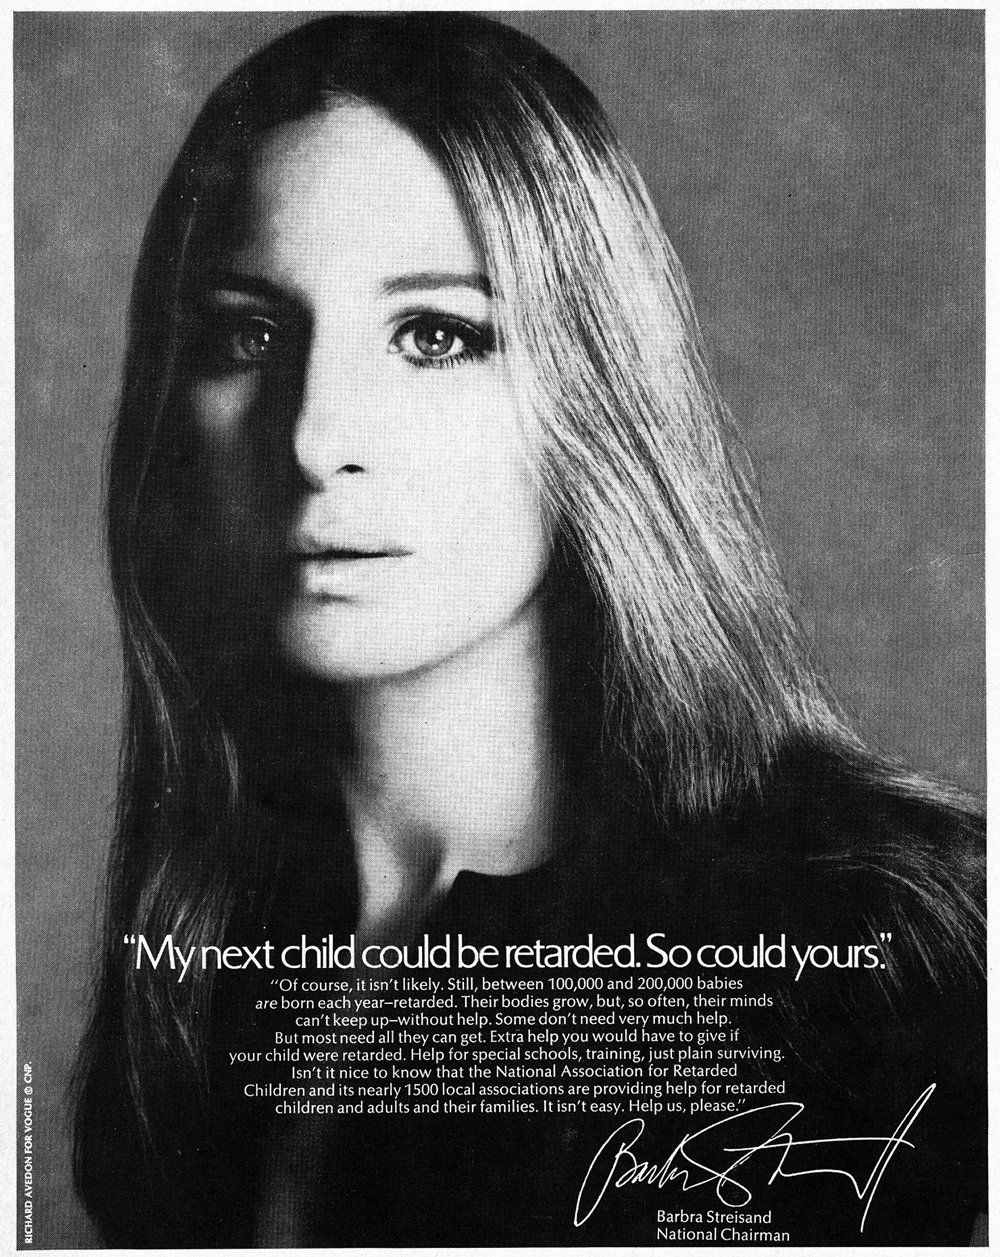 Streisand pictured prominently in an ad for retarded children, 1970.